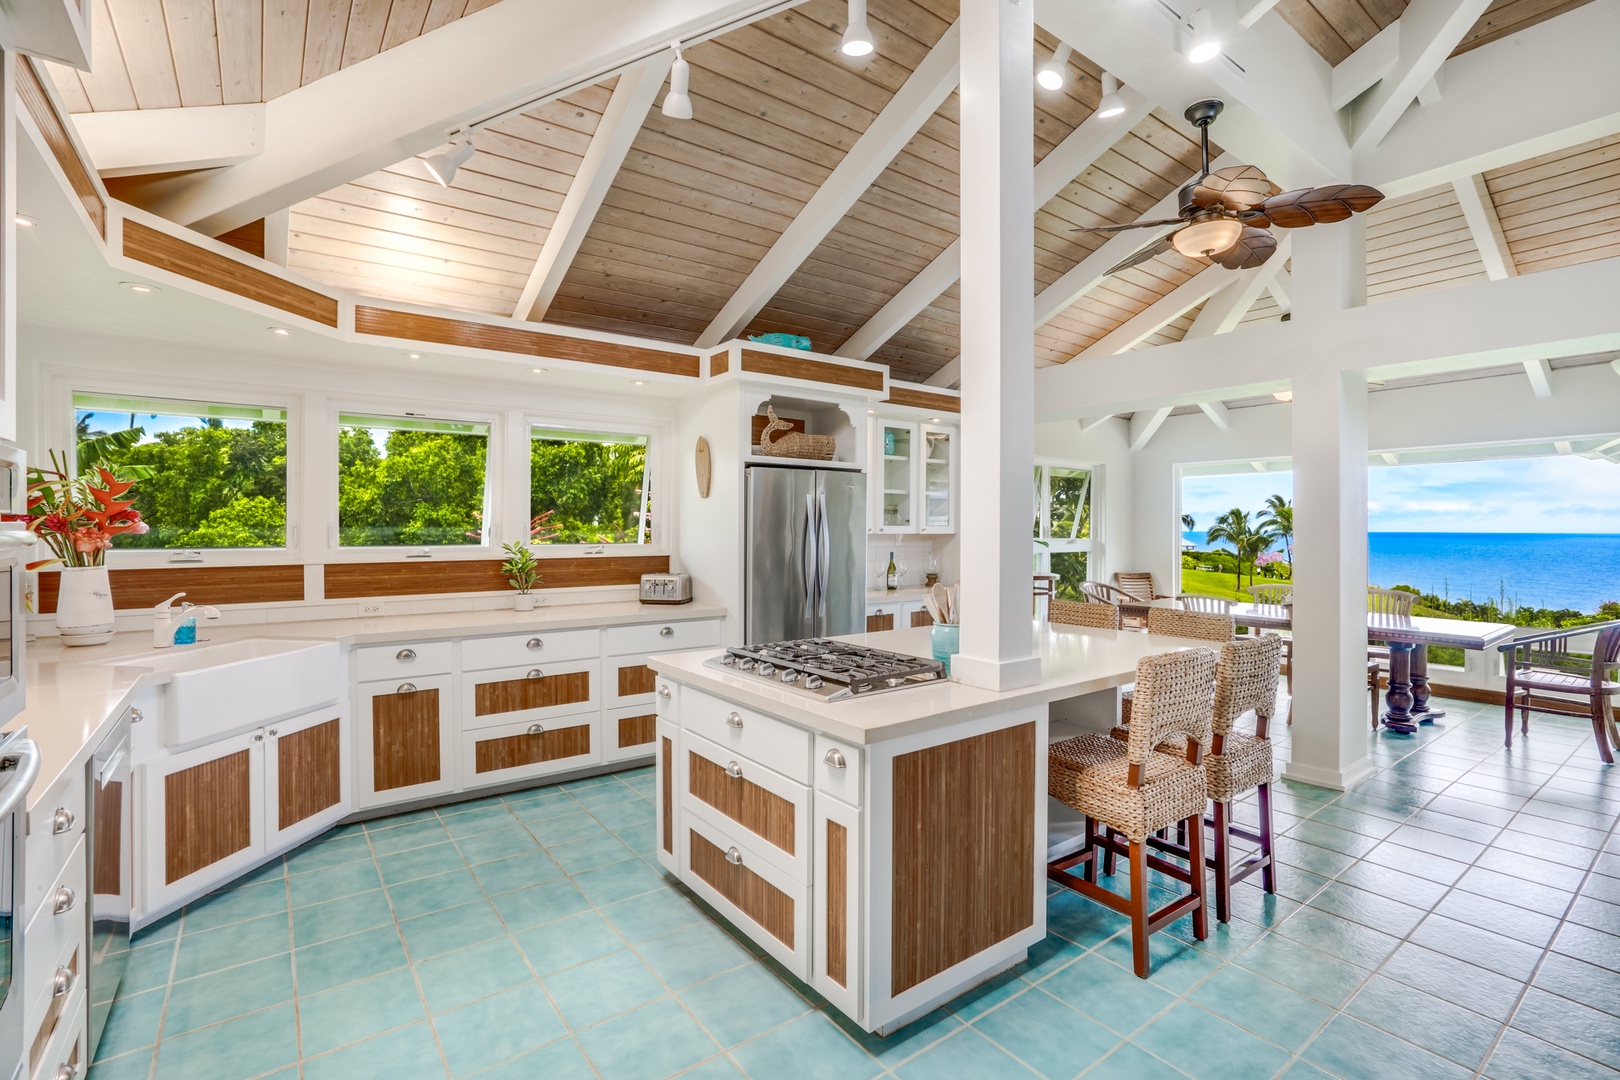 Princeville Vacation Rentals, Wai Lani - Gather, dine, and create lasting memories around our inviting kitchen island.